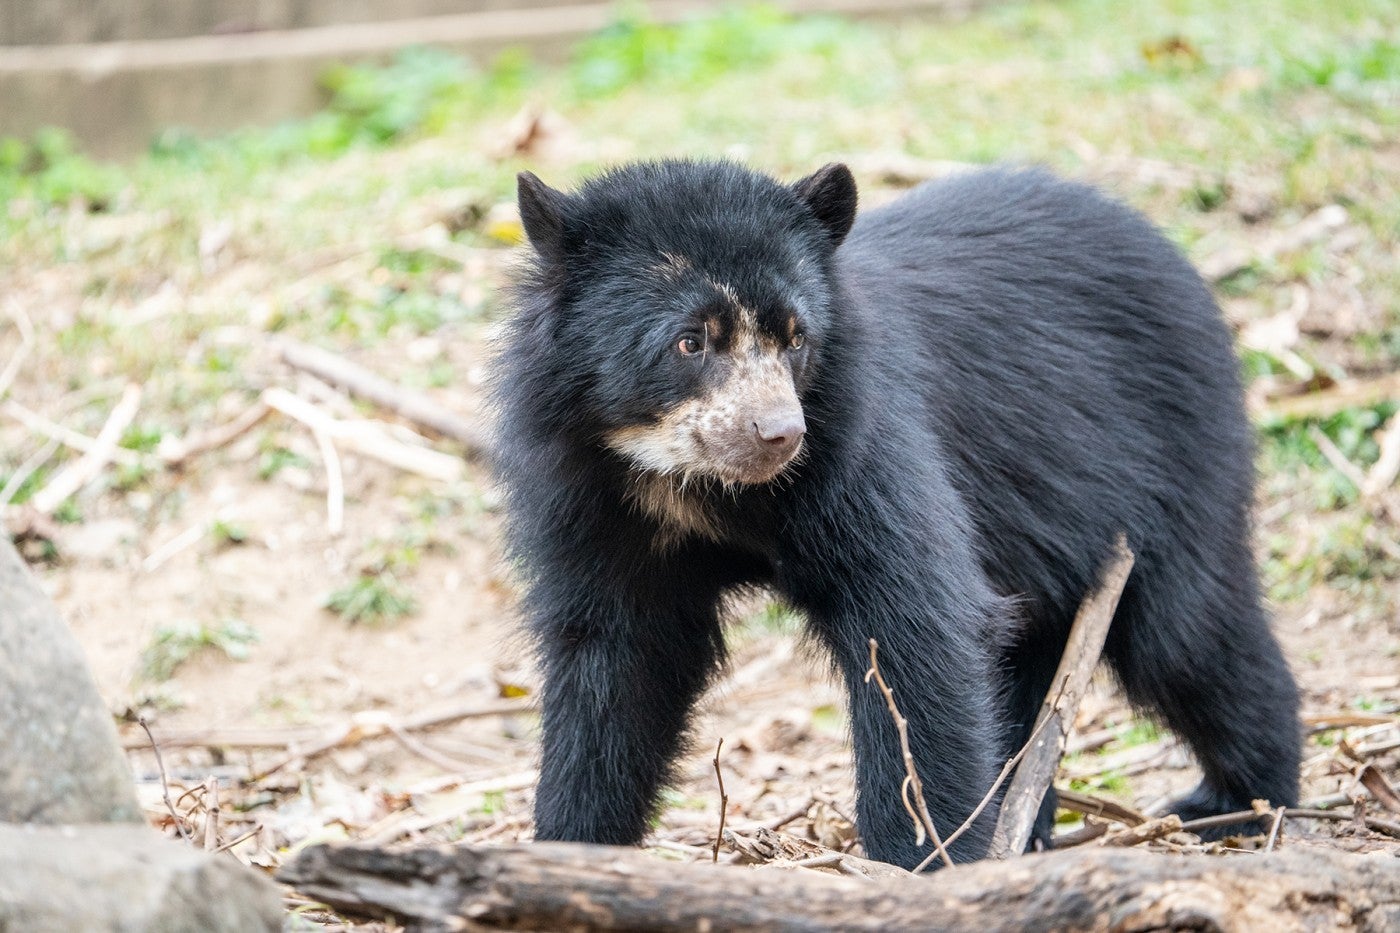 Andean bear cub Sean stands in the grass of his outdoor habitat.